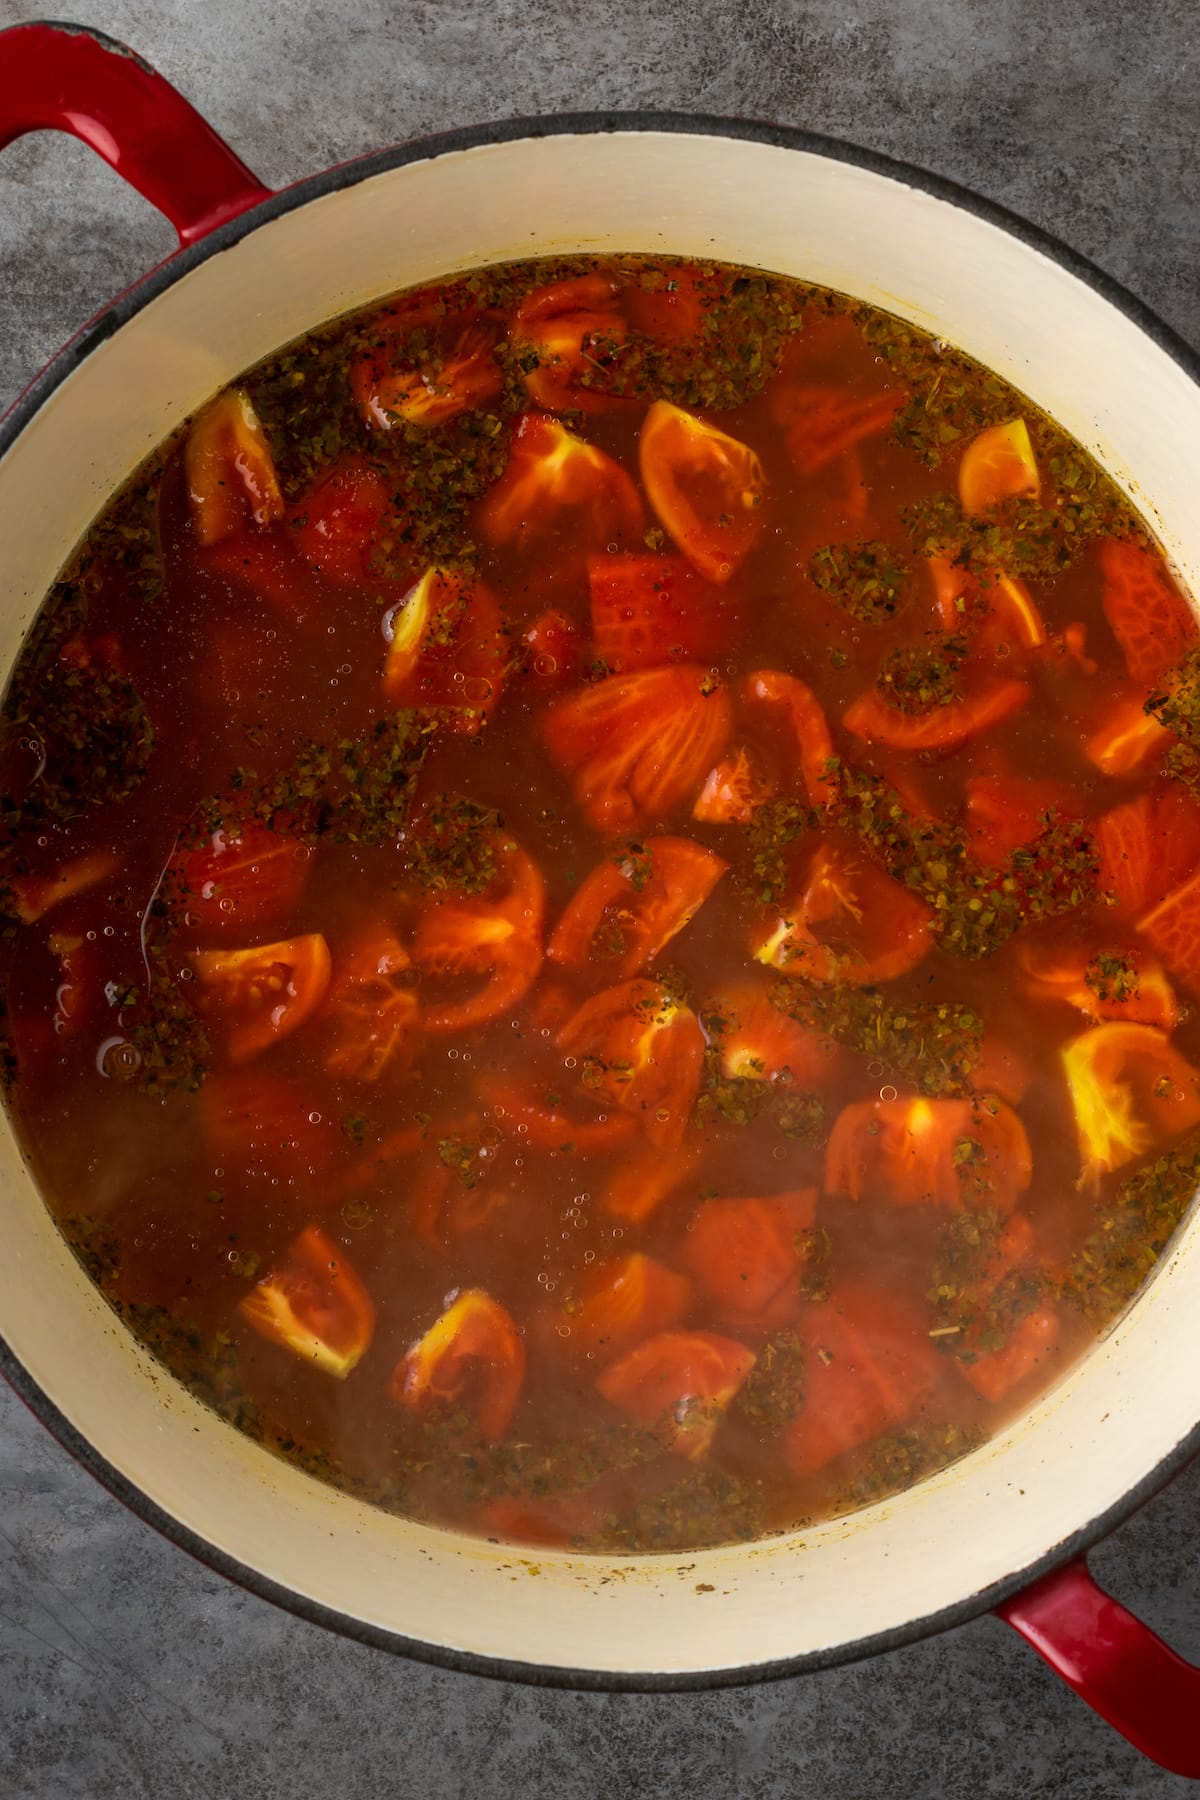 Put the tomatoes in a large pot containing the simmering broth.